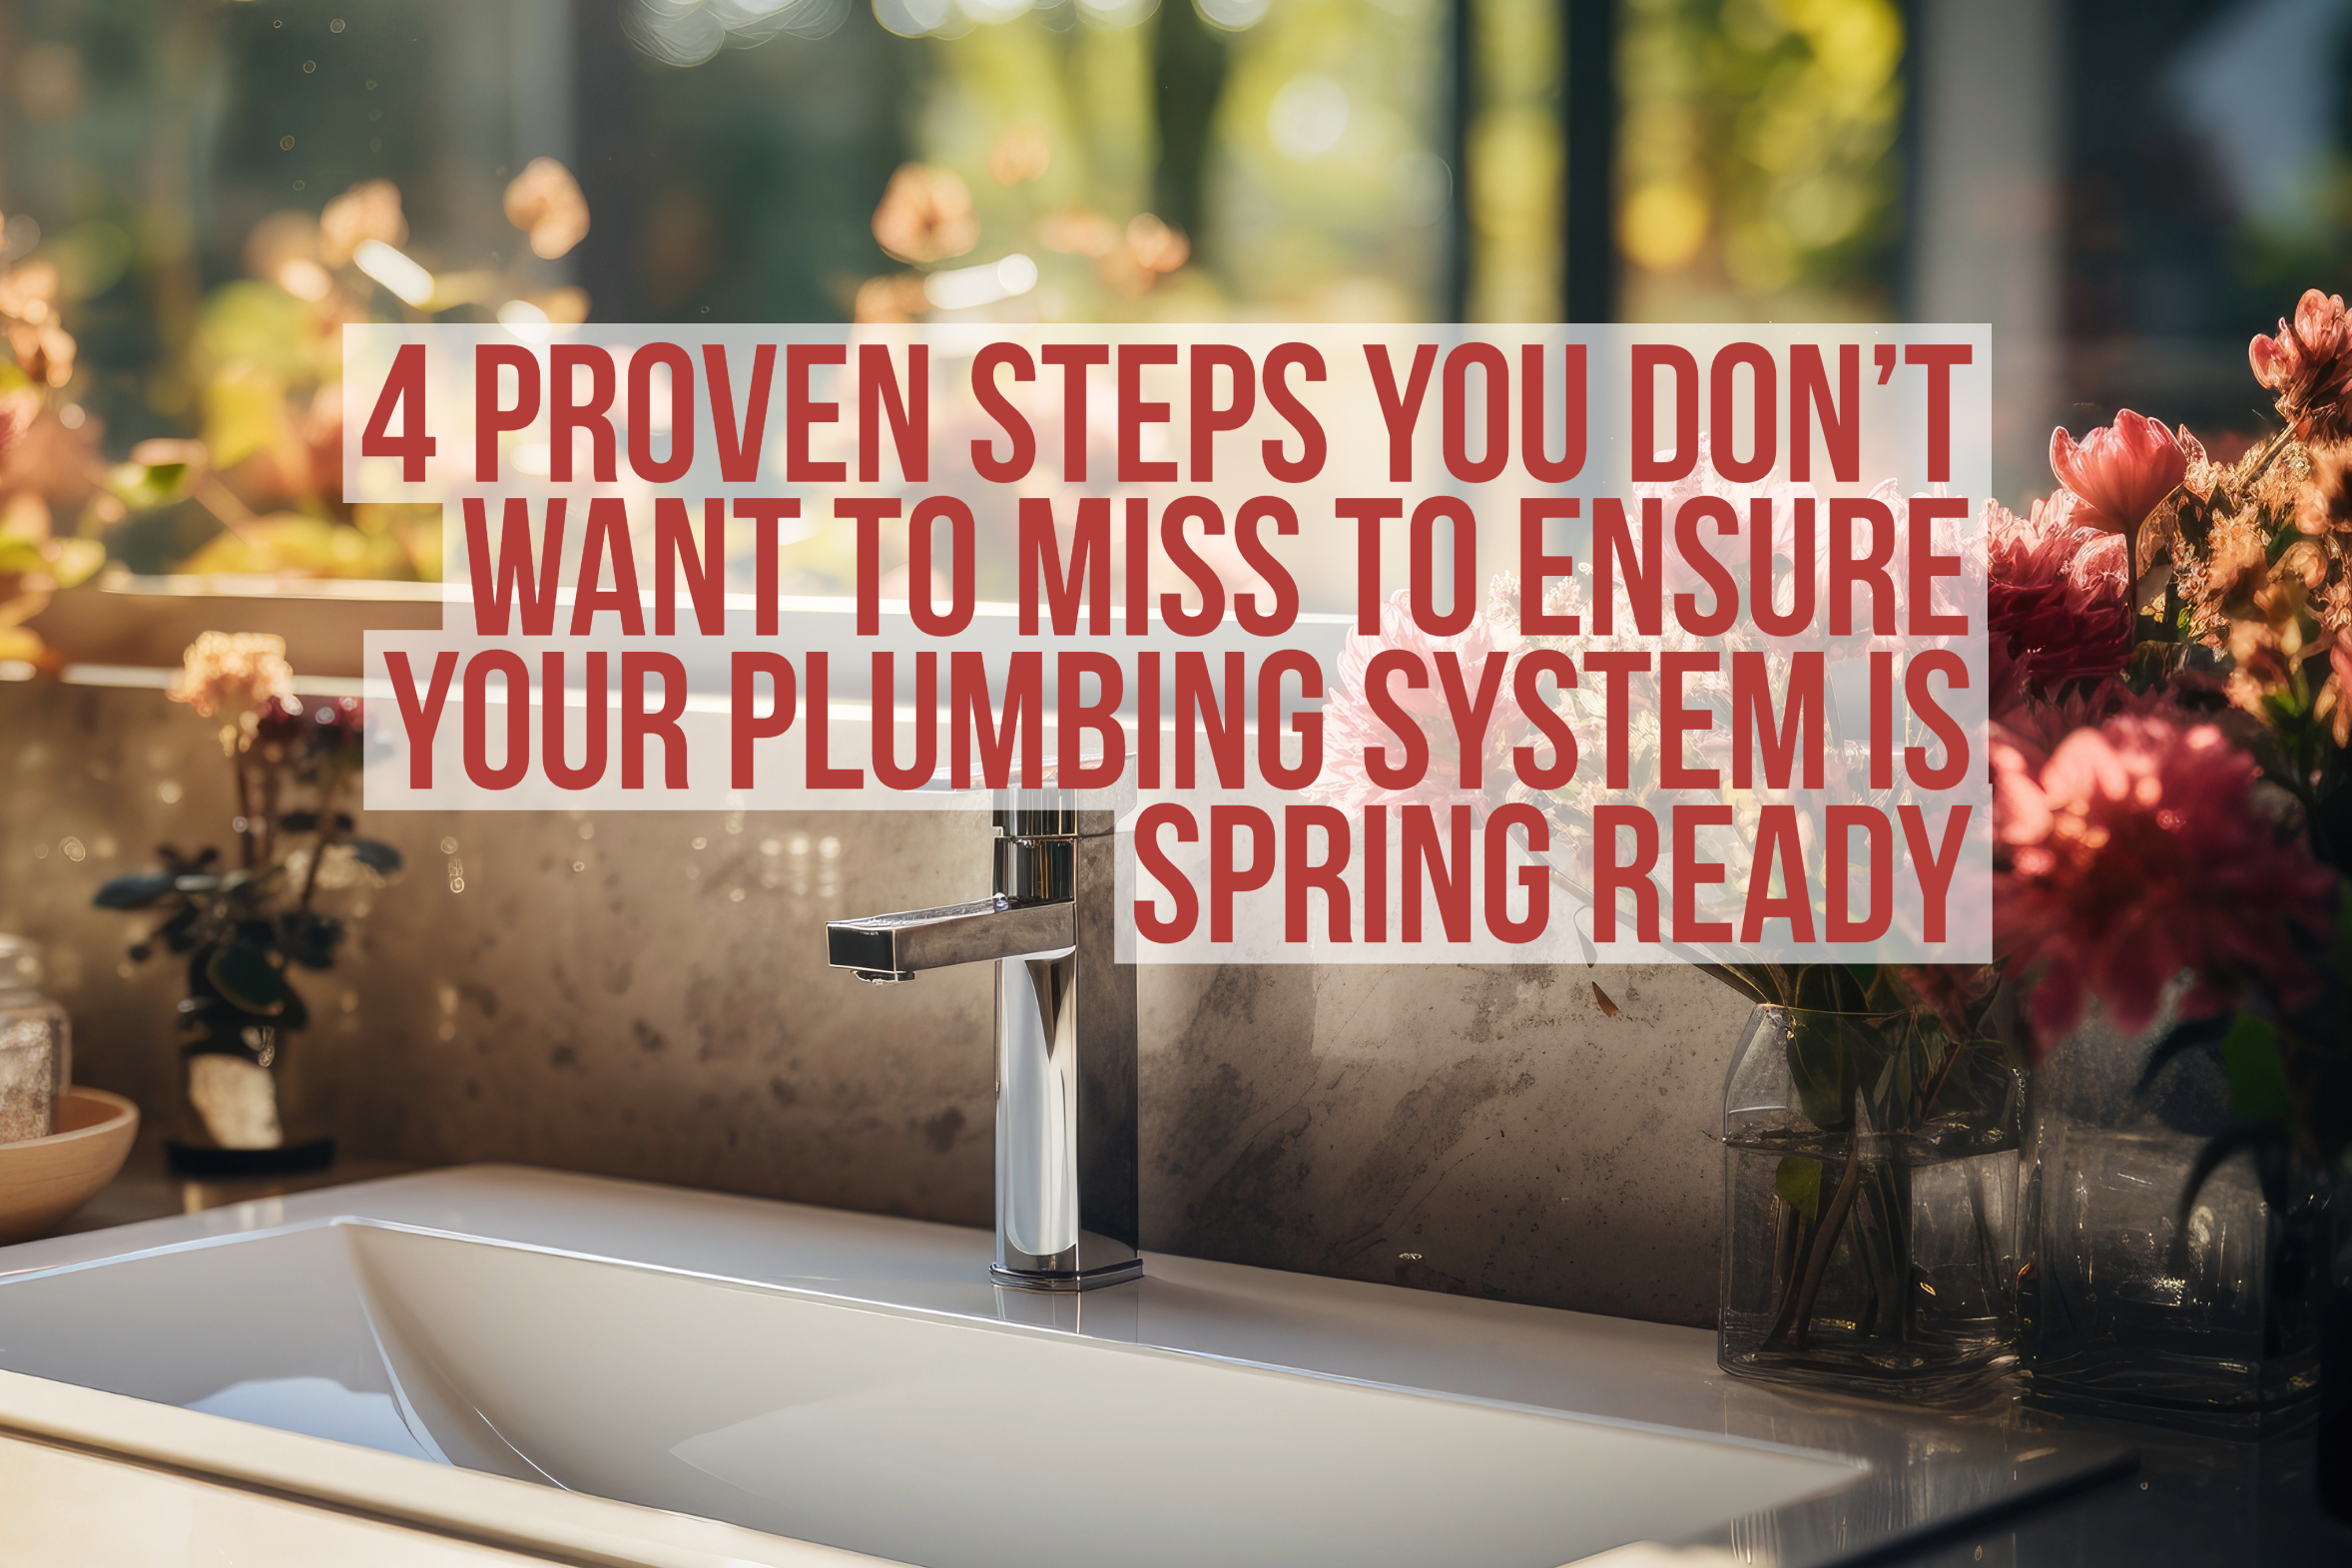 Steps to making sure your plumbing system is spring ready.